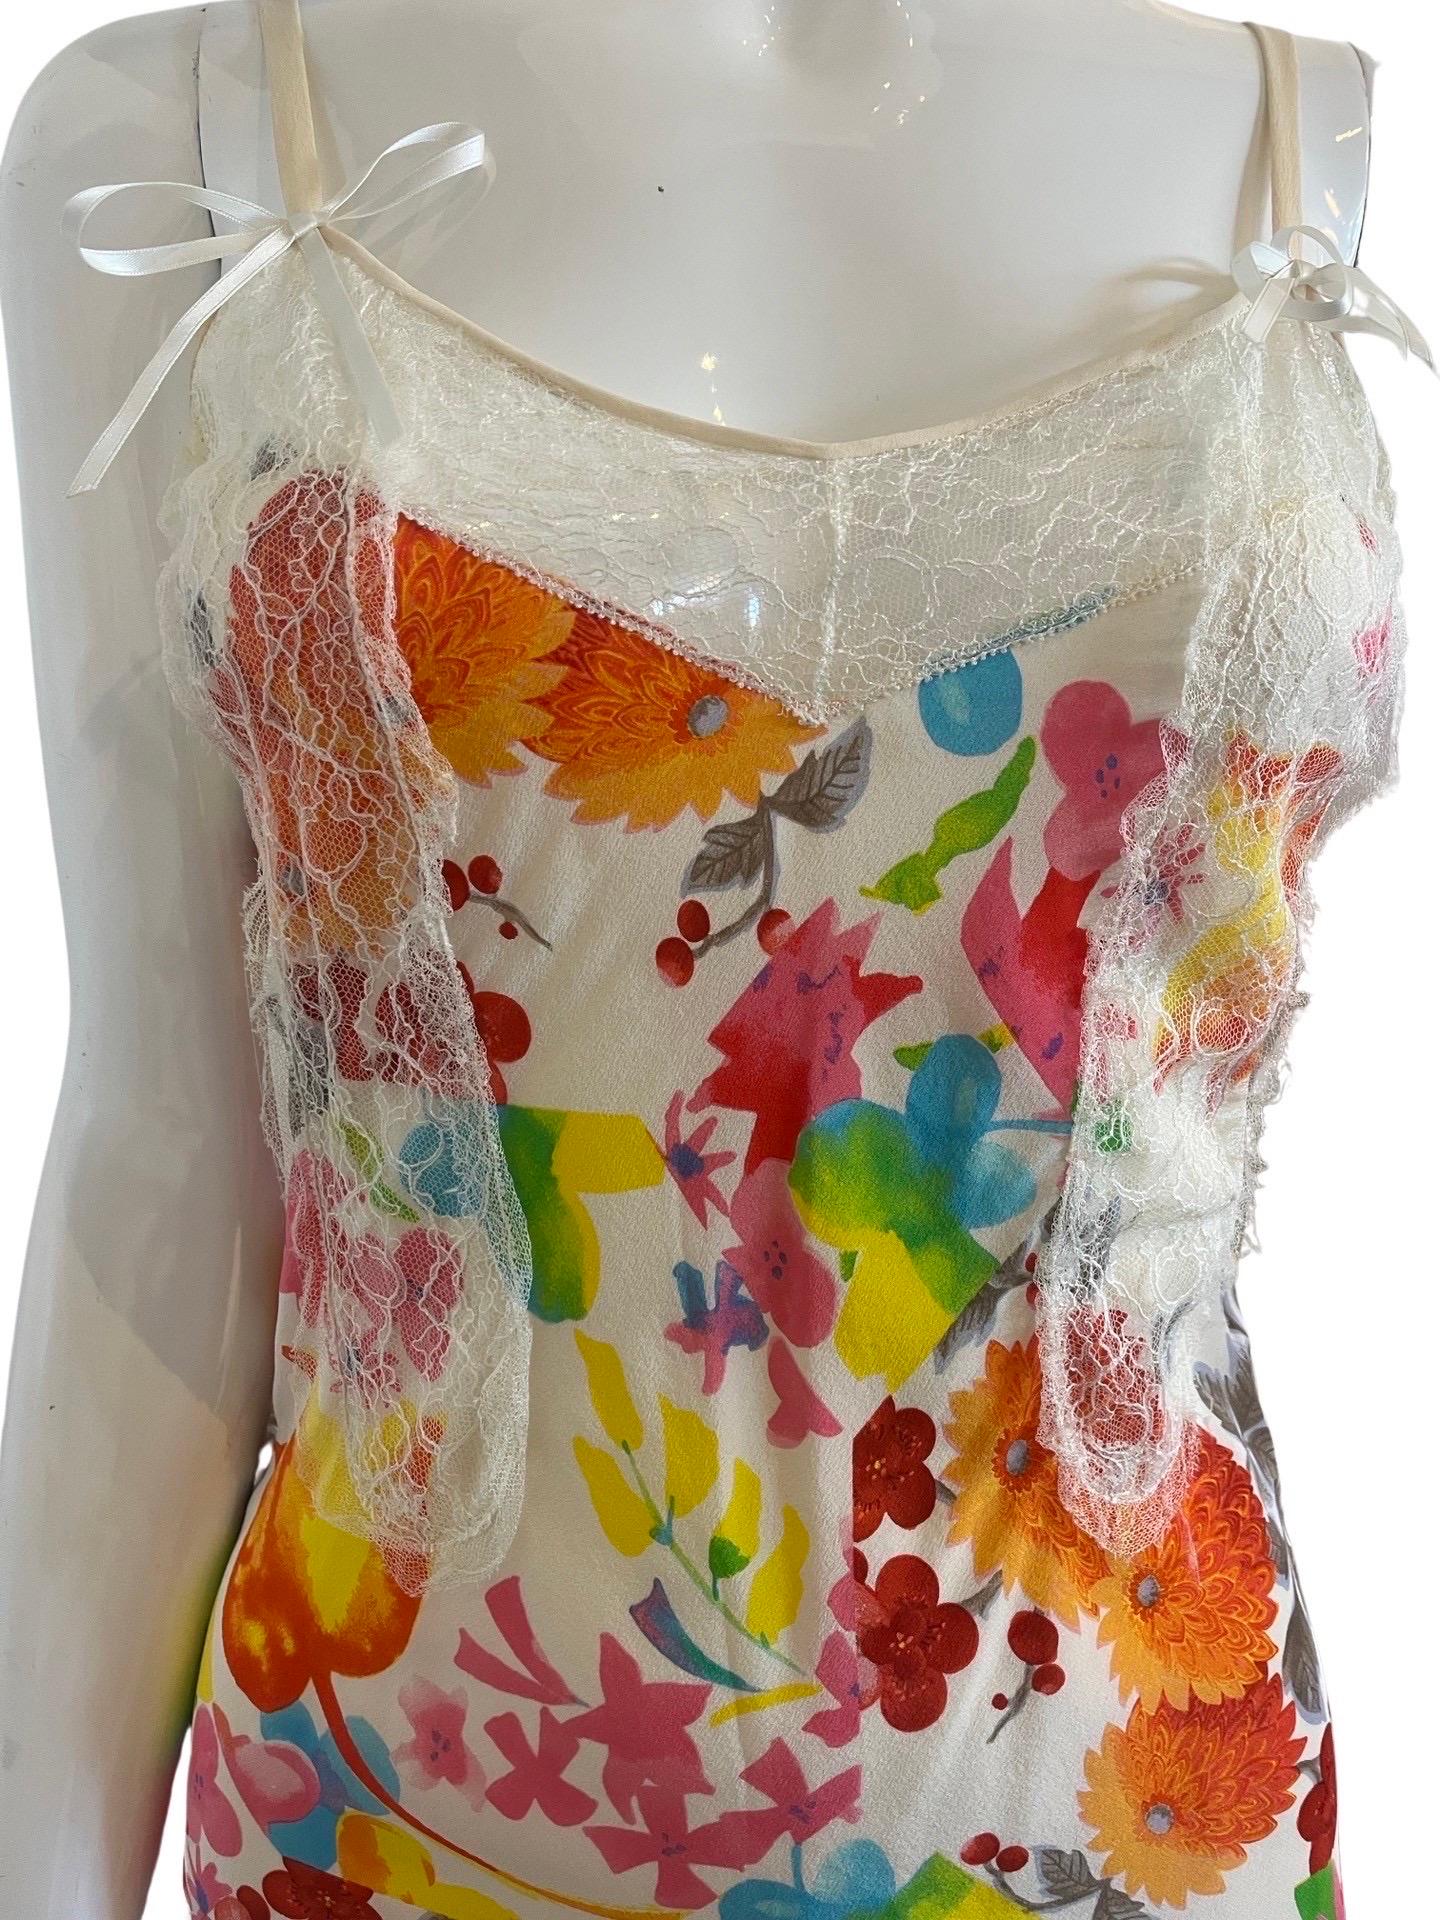 2000s Christian Dior by John Galliano Floral Dress For Sale 2